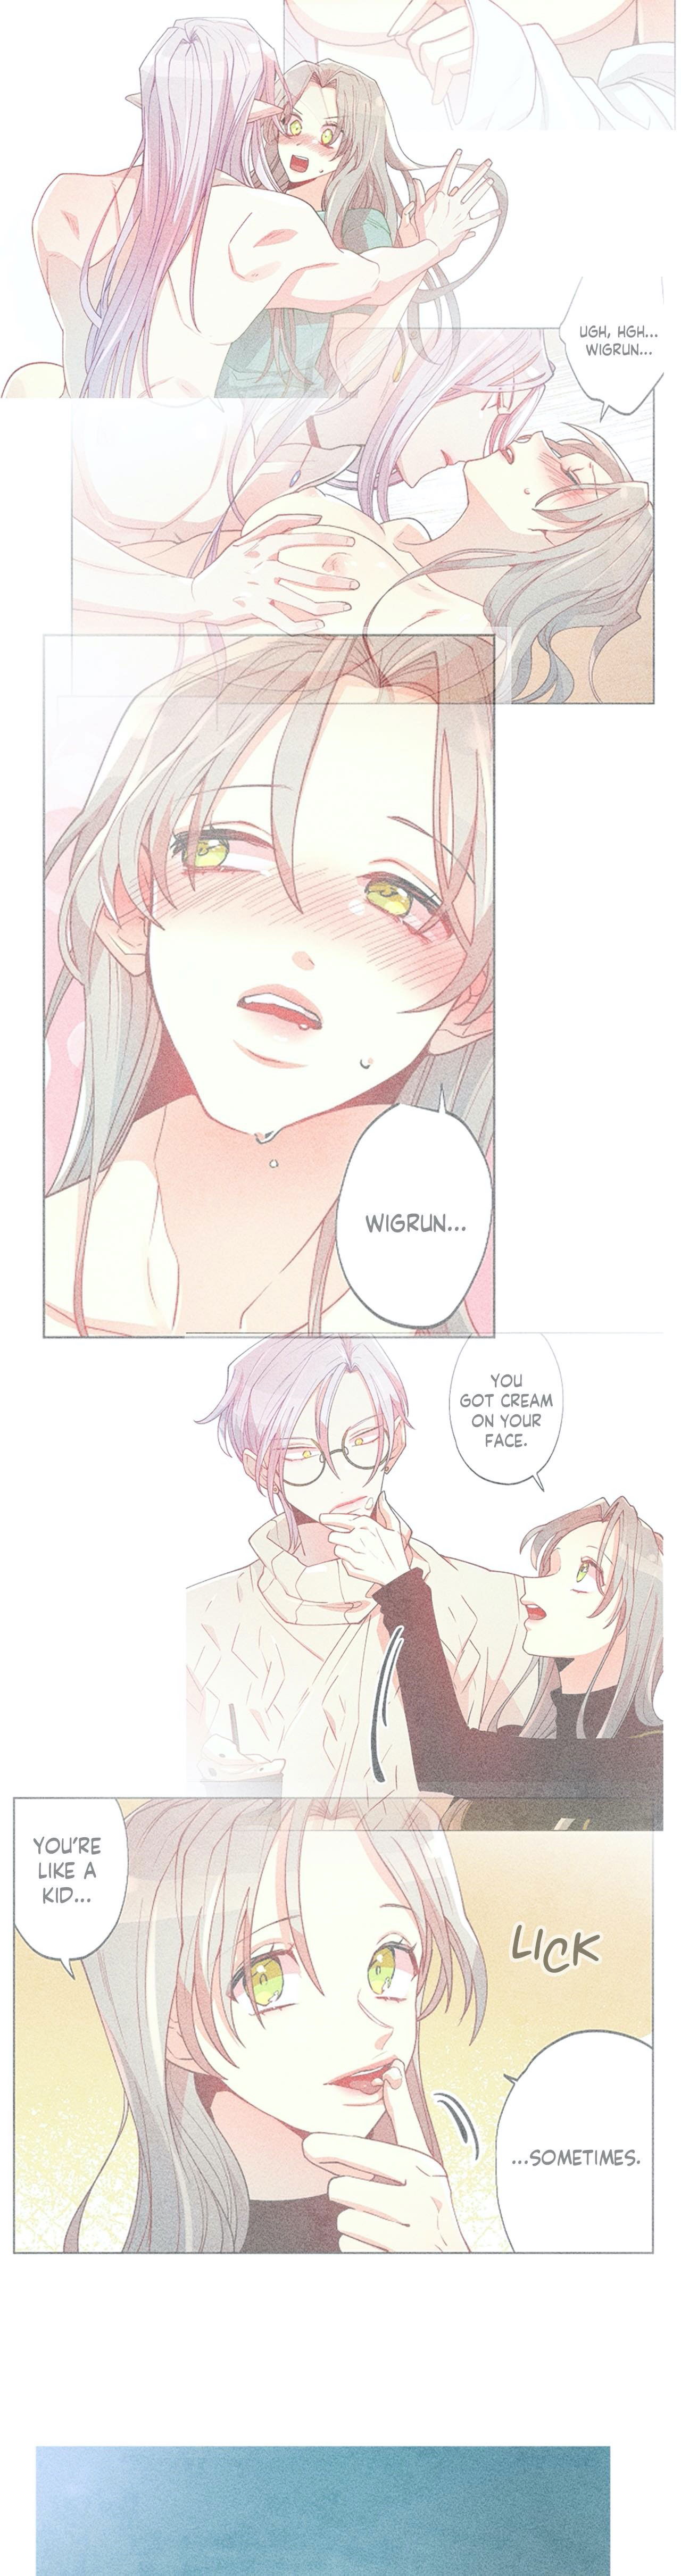 the-virgin-witch-chap-39-17